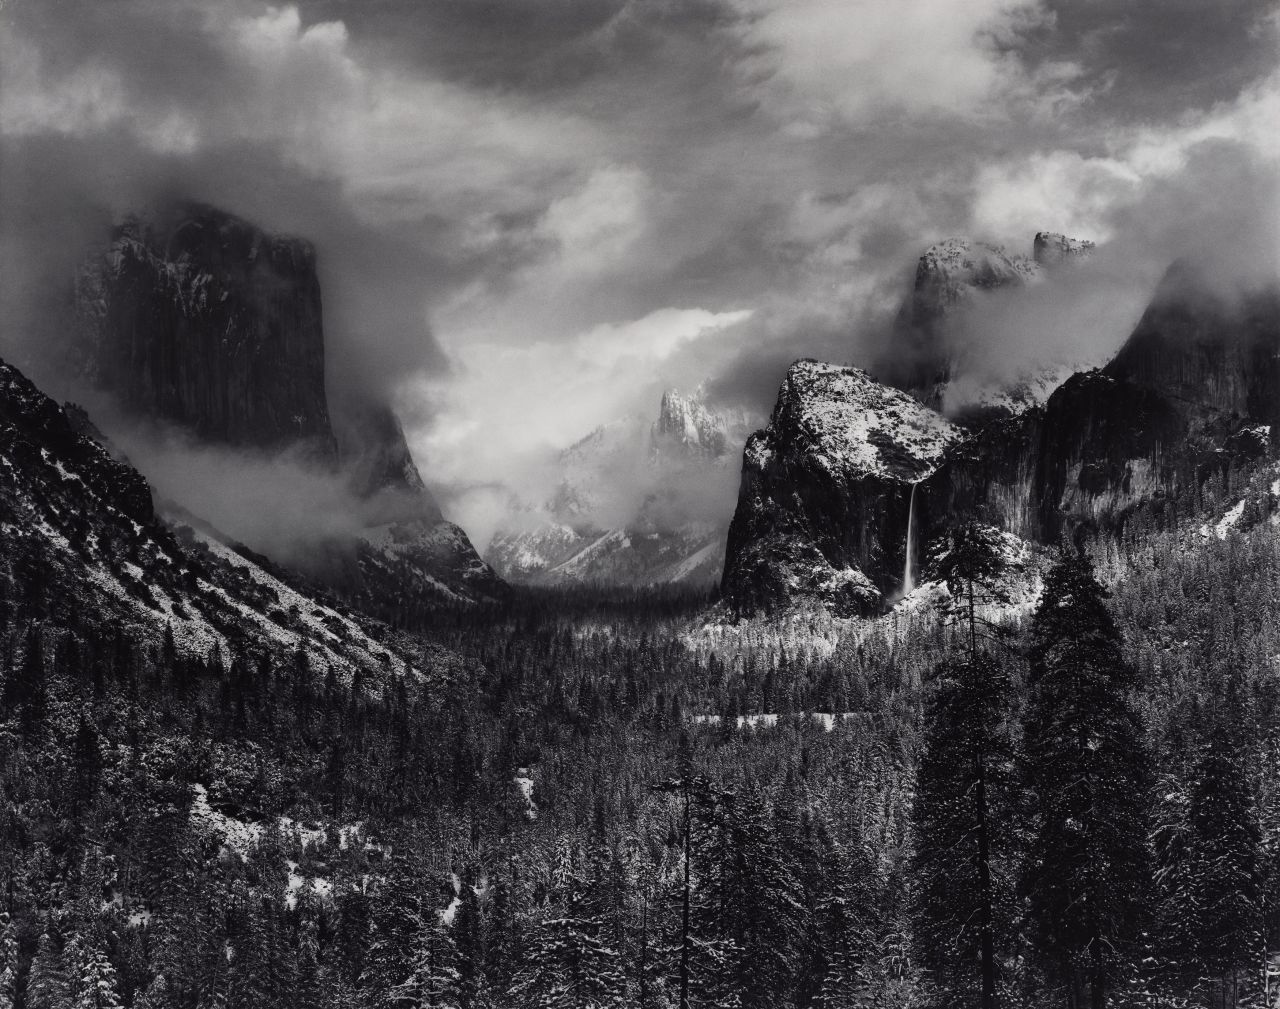 Clearing Winter Storm, Yosemite National Park, California, about 1937.